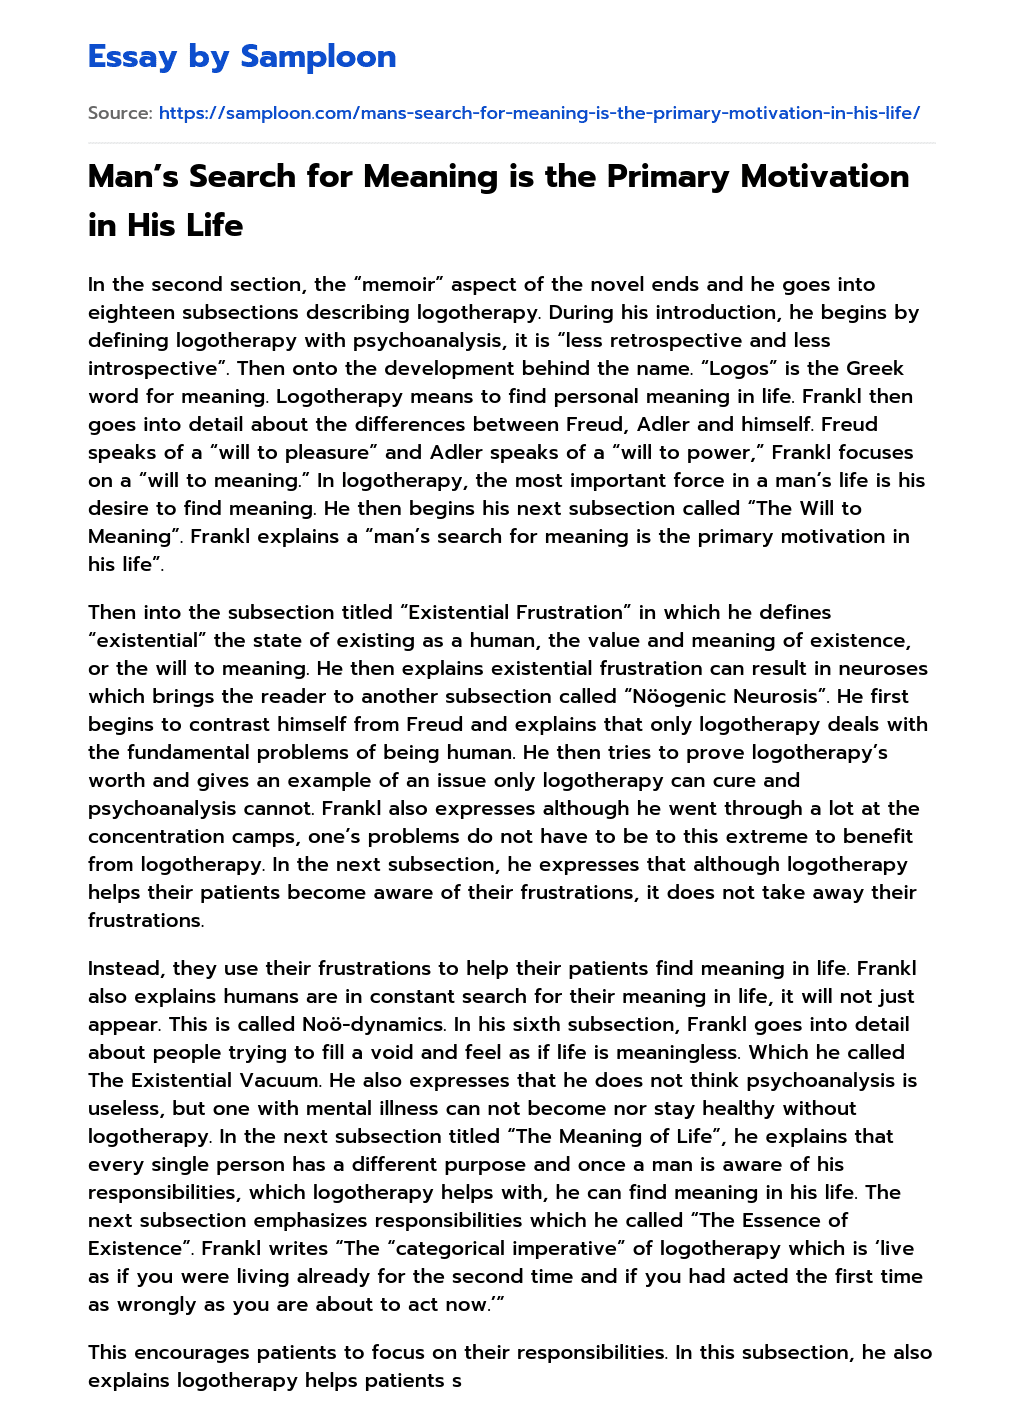 Man’s Search for Meaning is the Primary Motivation in His Life essay